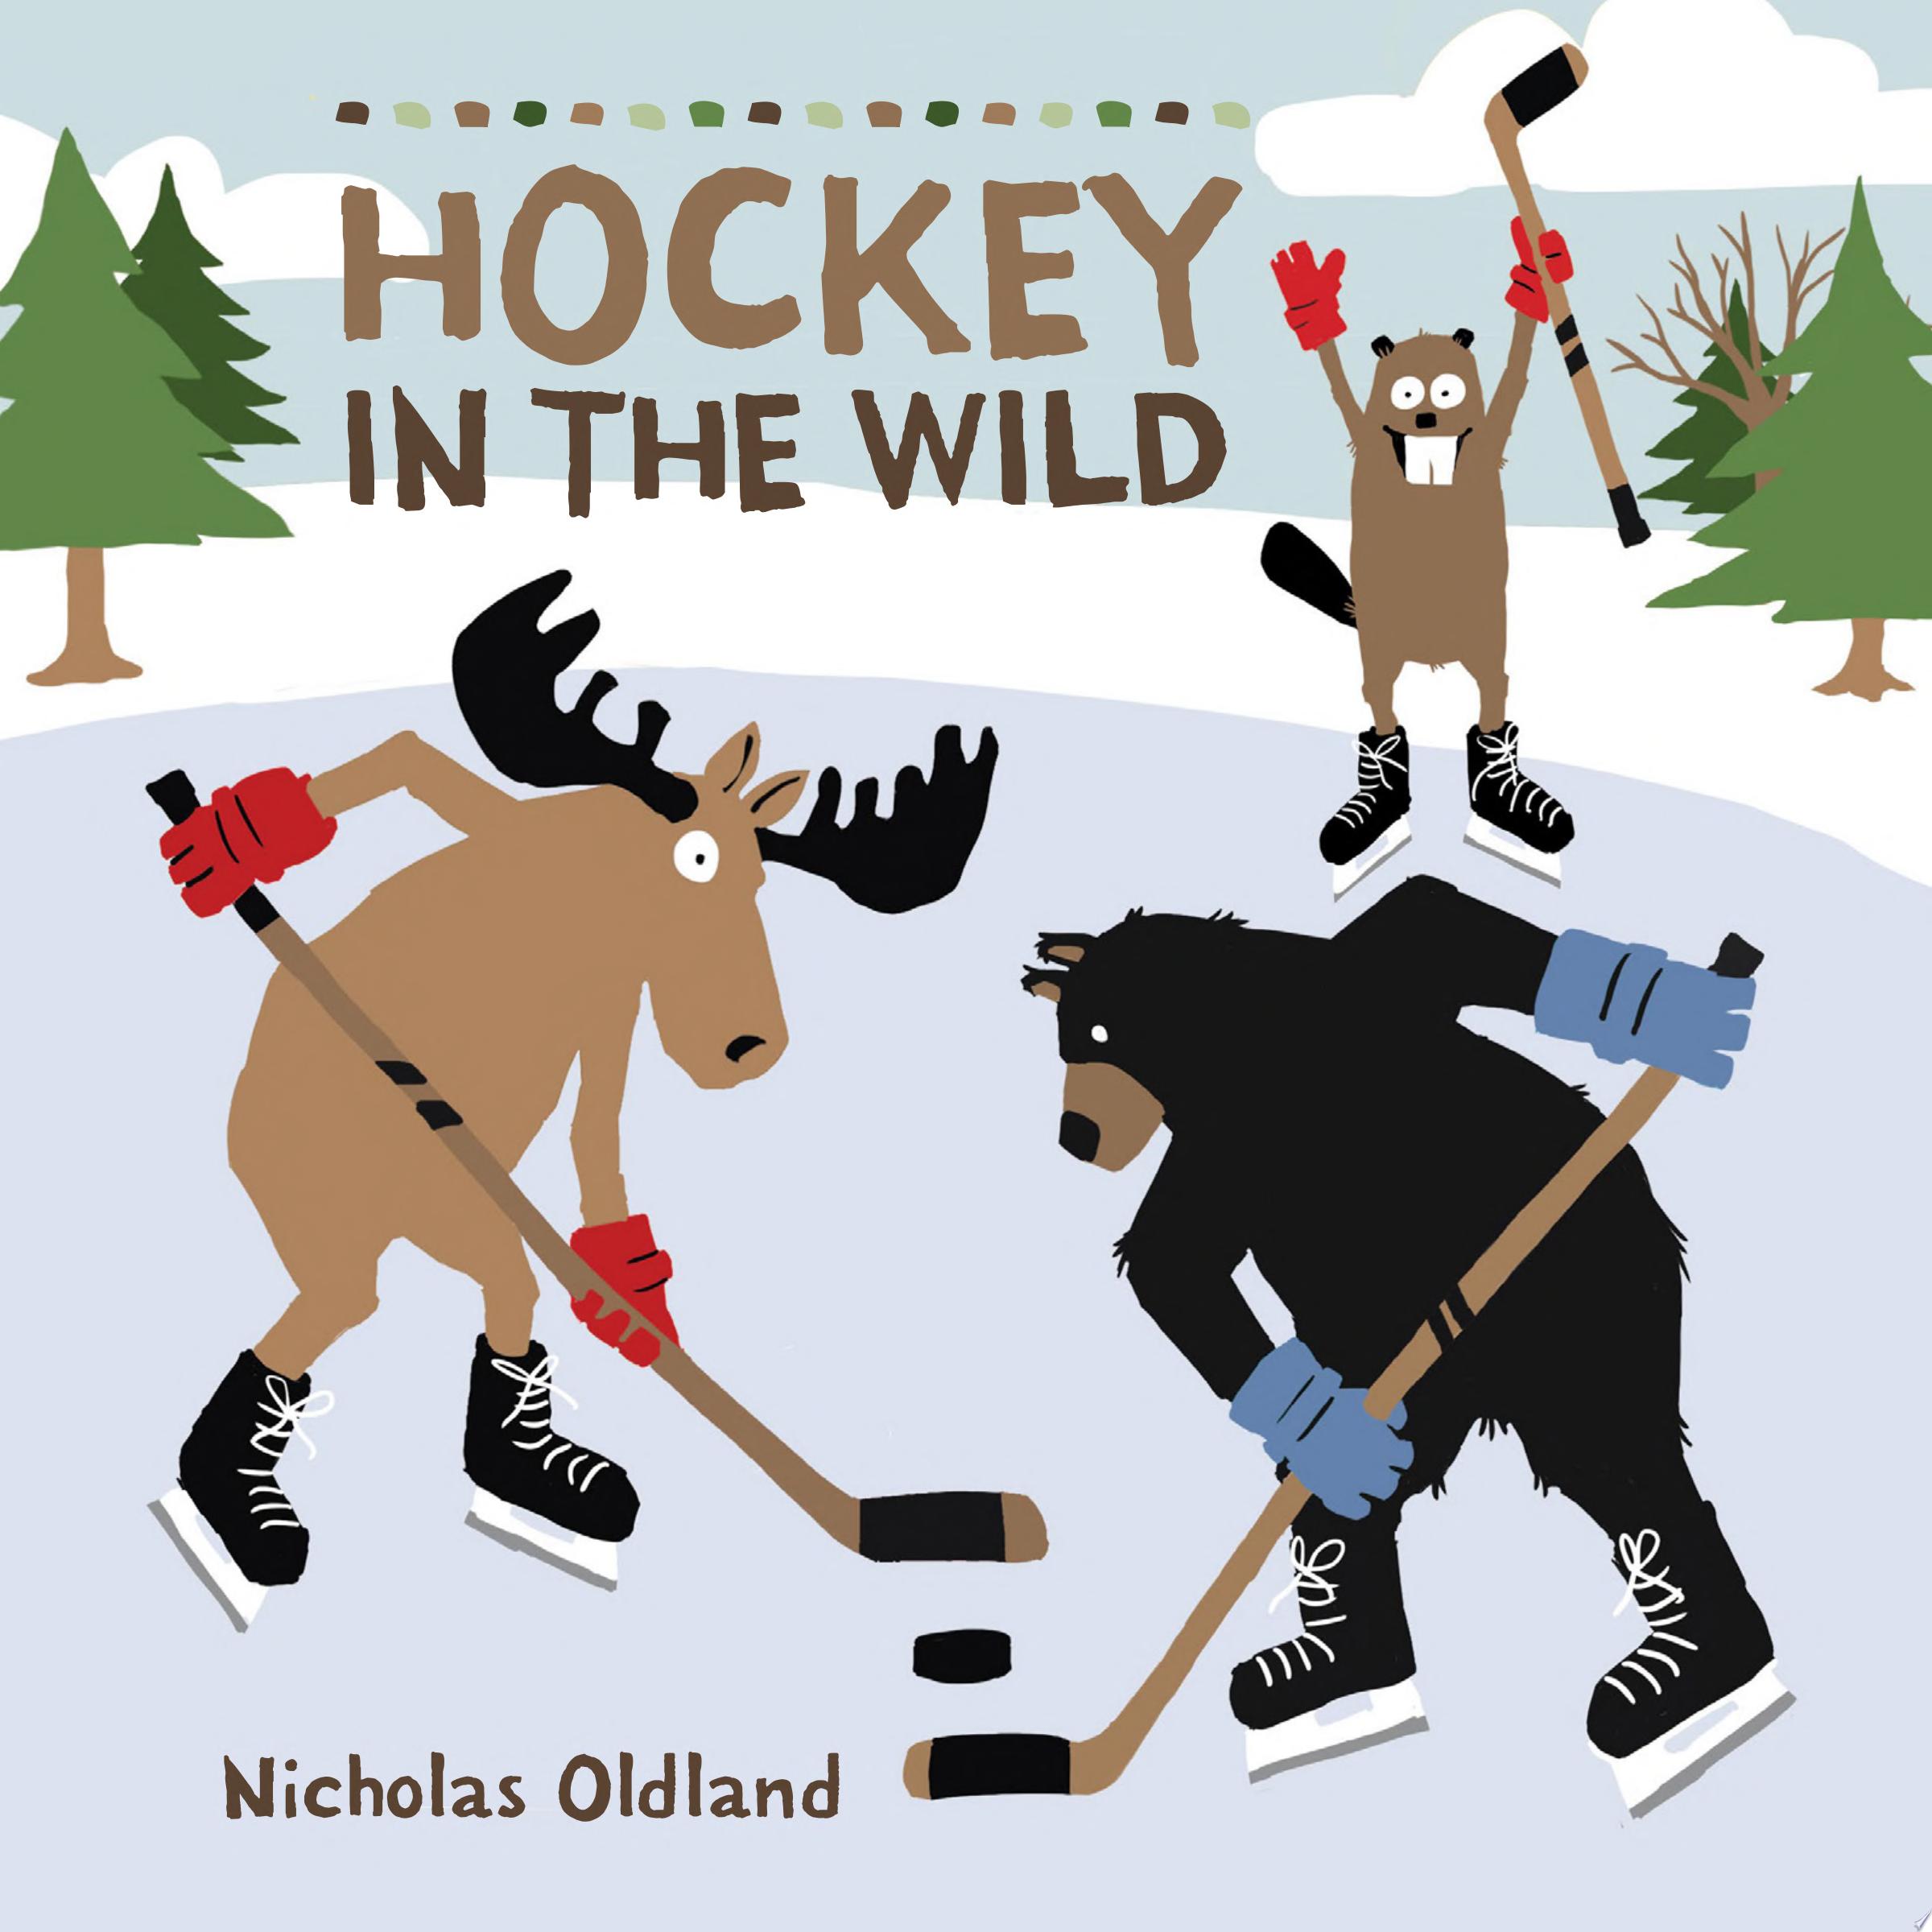 Image for "Hockey in the Wild"